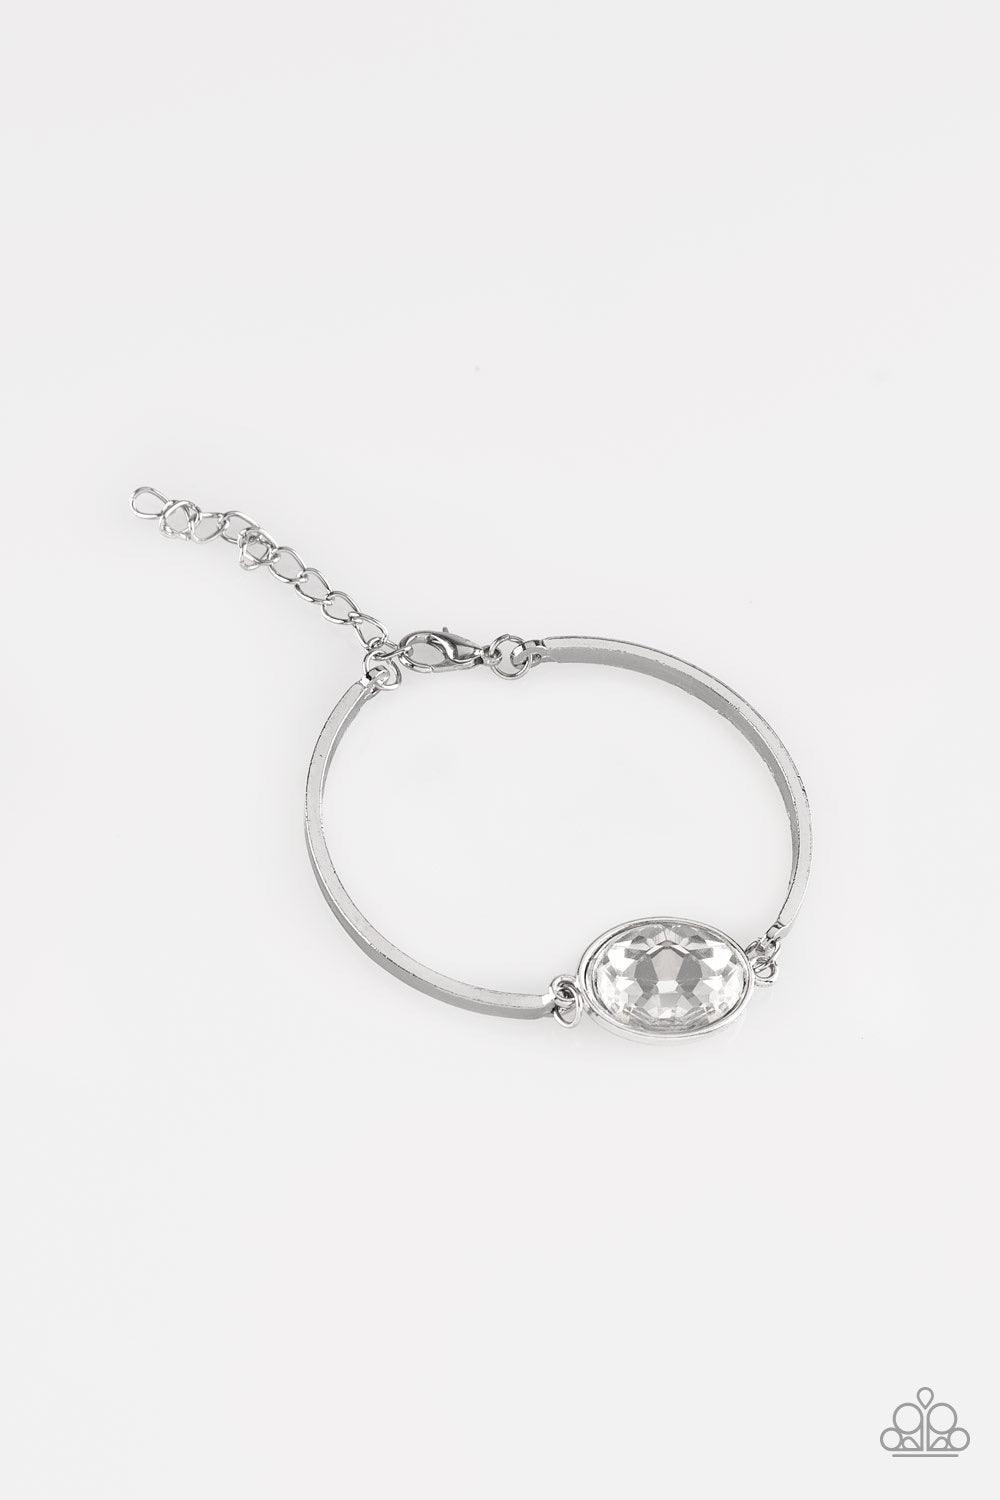 Paparazzi Accessories Definitely Dashing - White Arcing silver bars connect to a faceted white gem centerpiece, creating a dainty cuff-like bracelet around the wrist. Features an adjustable clasp closure. Sold as one individual bracelet. Jewelry